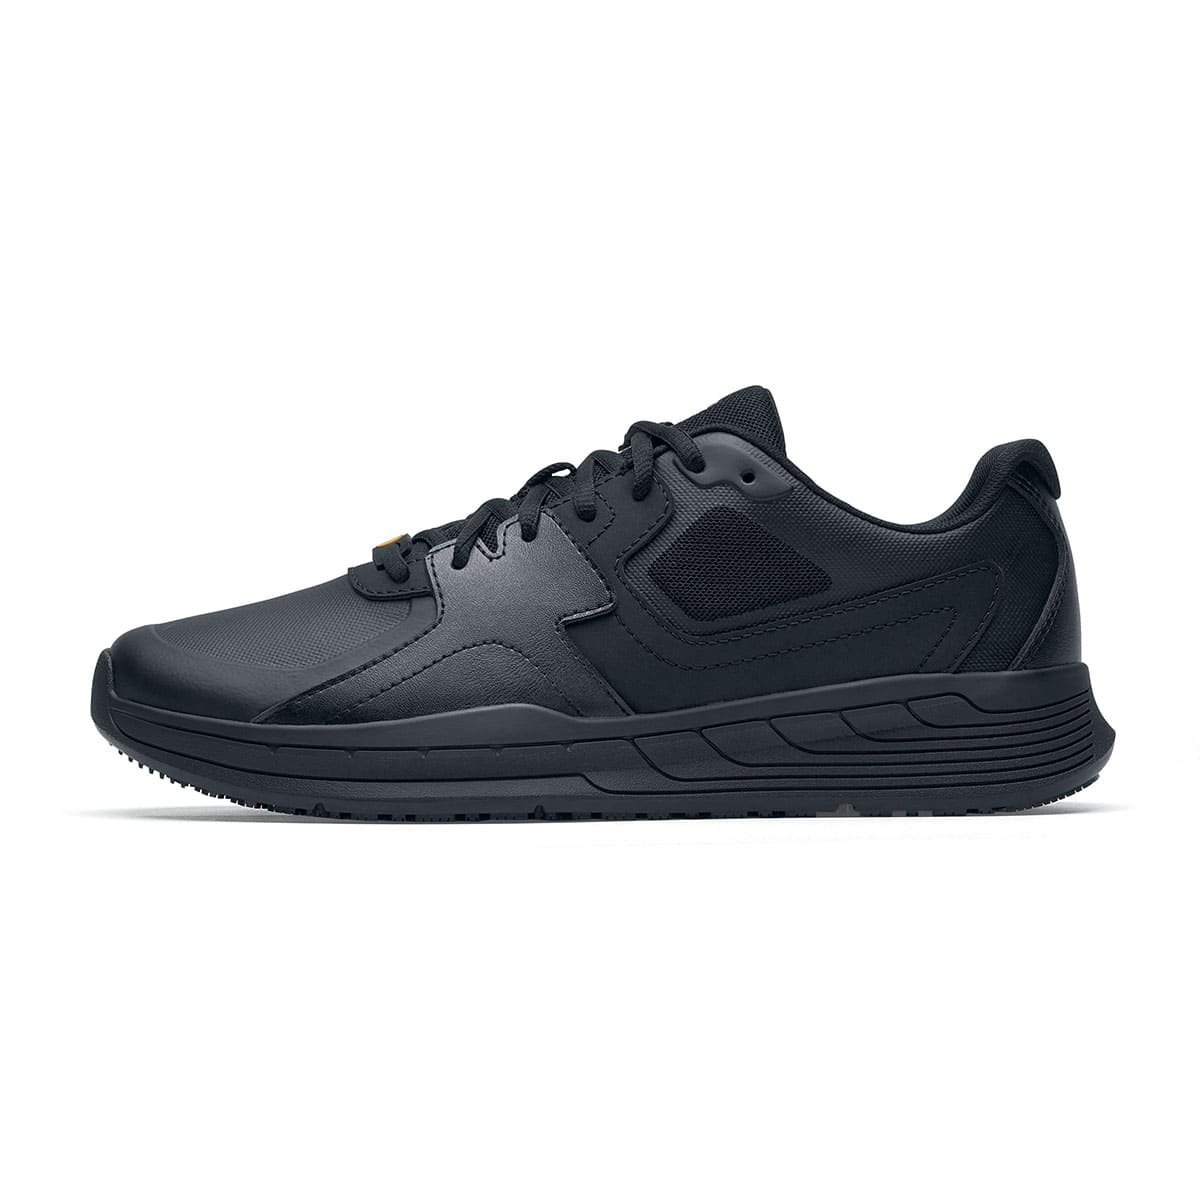 The Shoes for Crews Condor II Unisex Black trainers feature a slip-resistant outsole and an easy-to-clean, breathable fabric upper with SpillGuard protection, seen from the left.